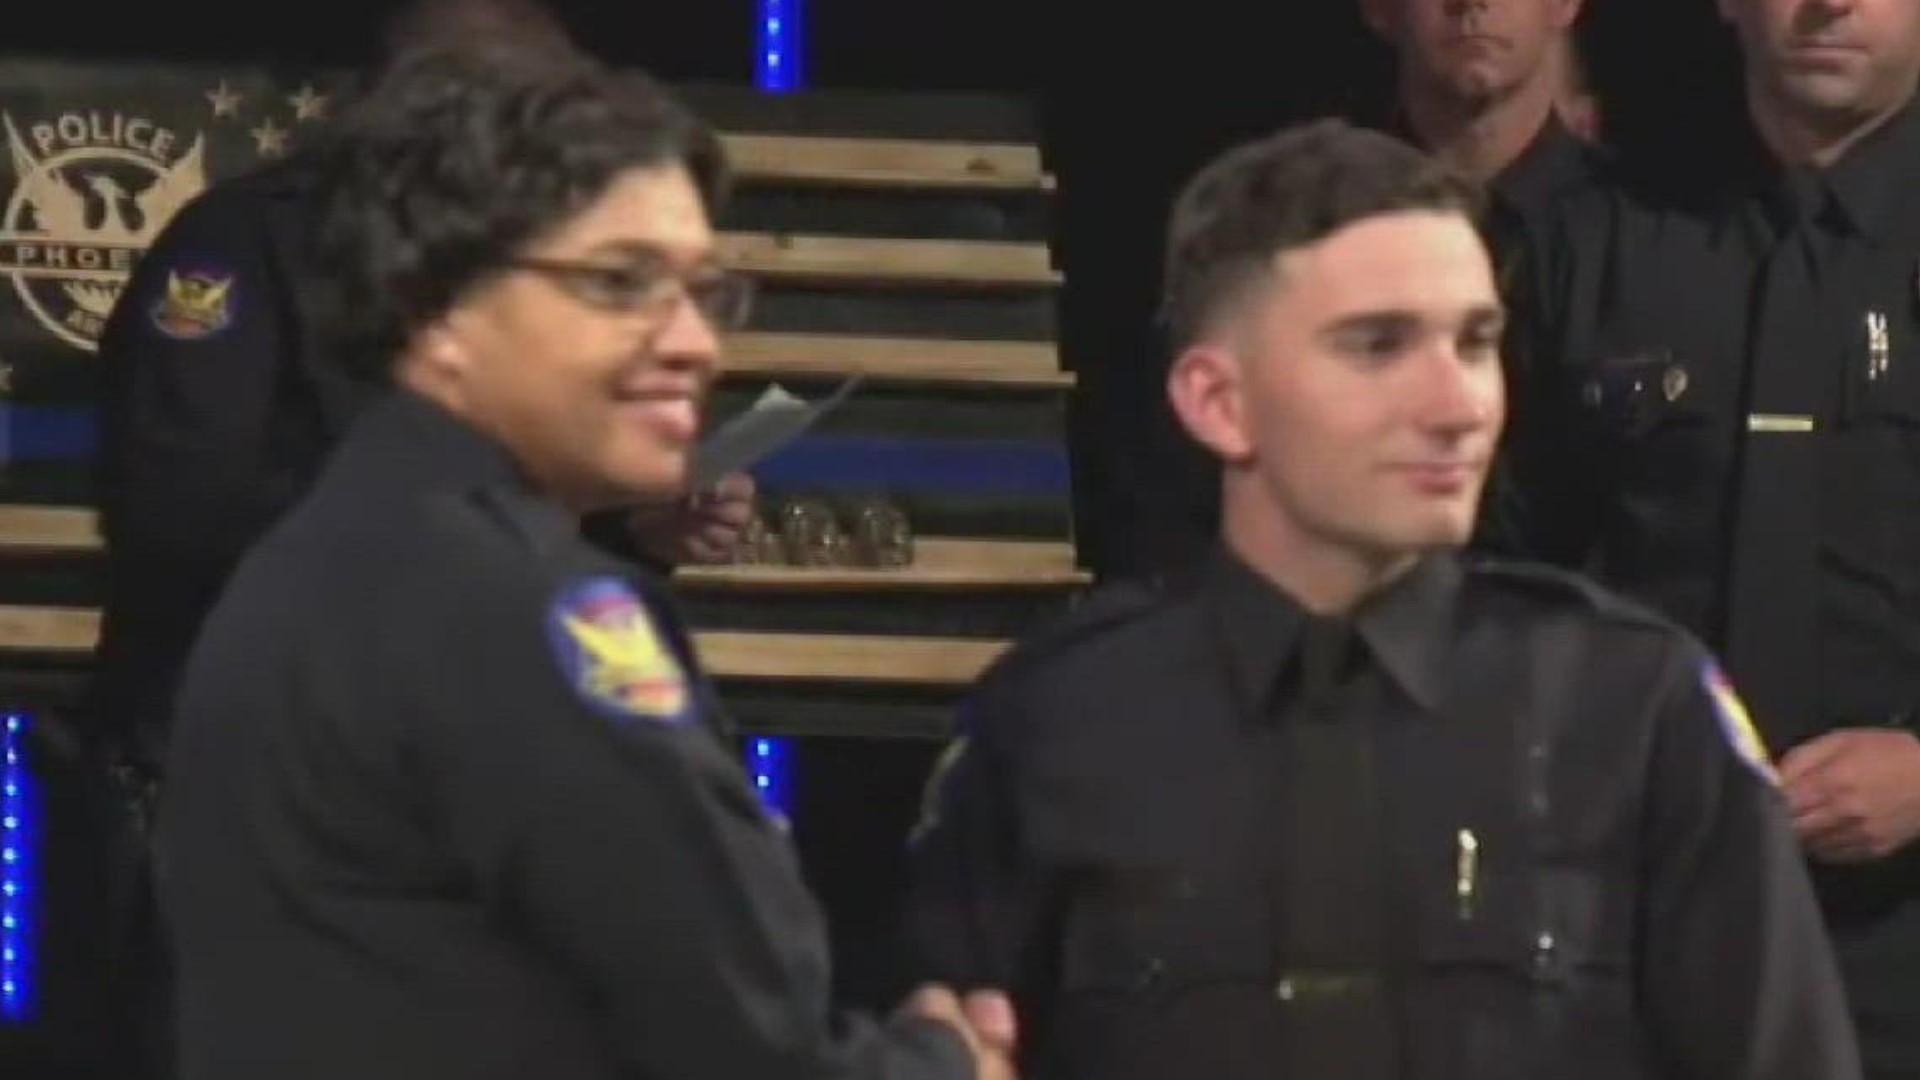 22-year-old Tyler Moldovan, was hit by the gunfire and the other officers at the scene were able to subdue the suspect without firing their weapons.